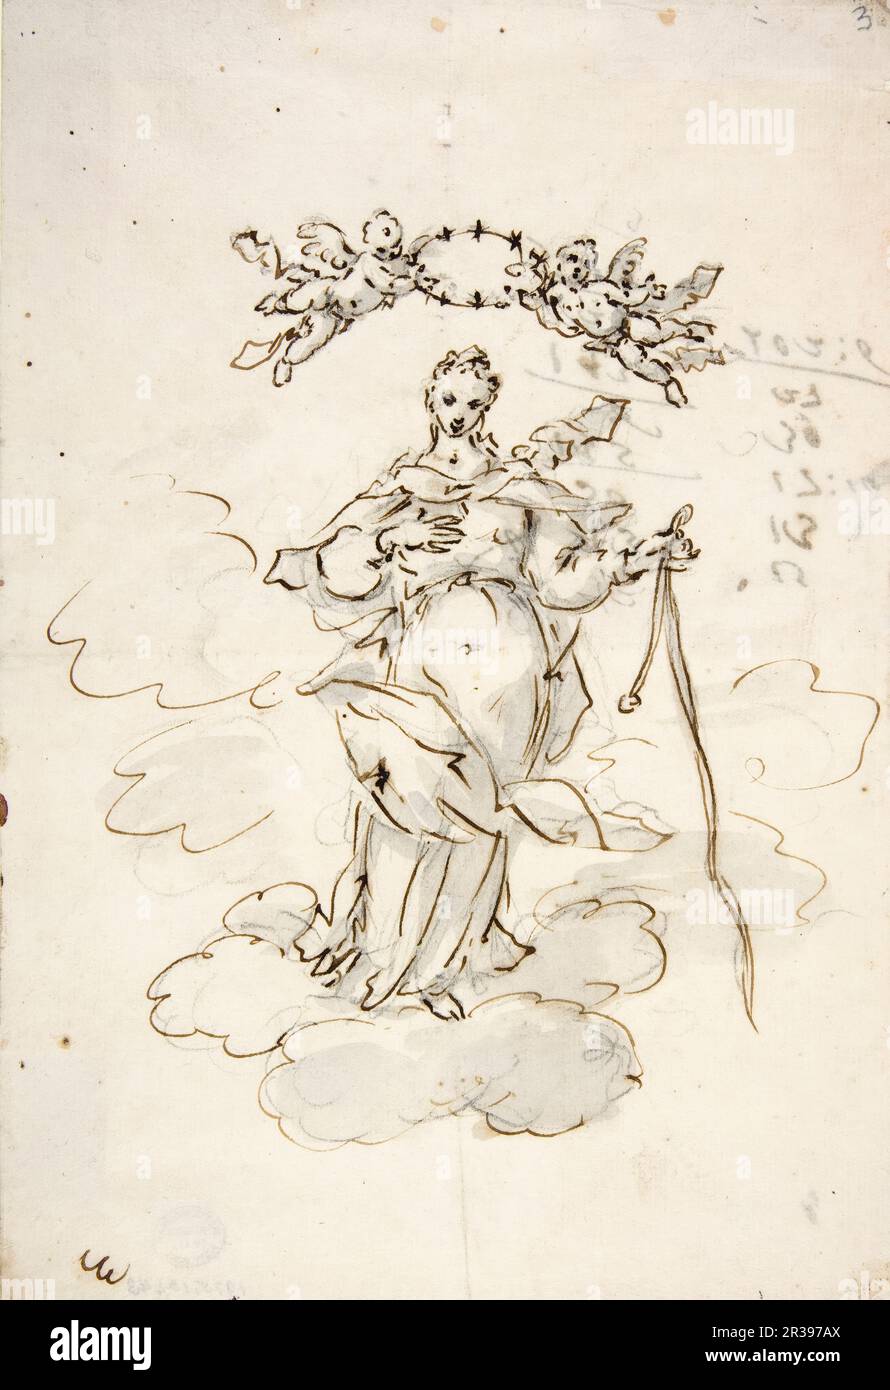 Giovanni Antonio Pellegrini, Virgin Standing on Clouds Holding a Scapular in Her Left Hand, sketch drawing before 1741 Stock Photo